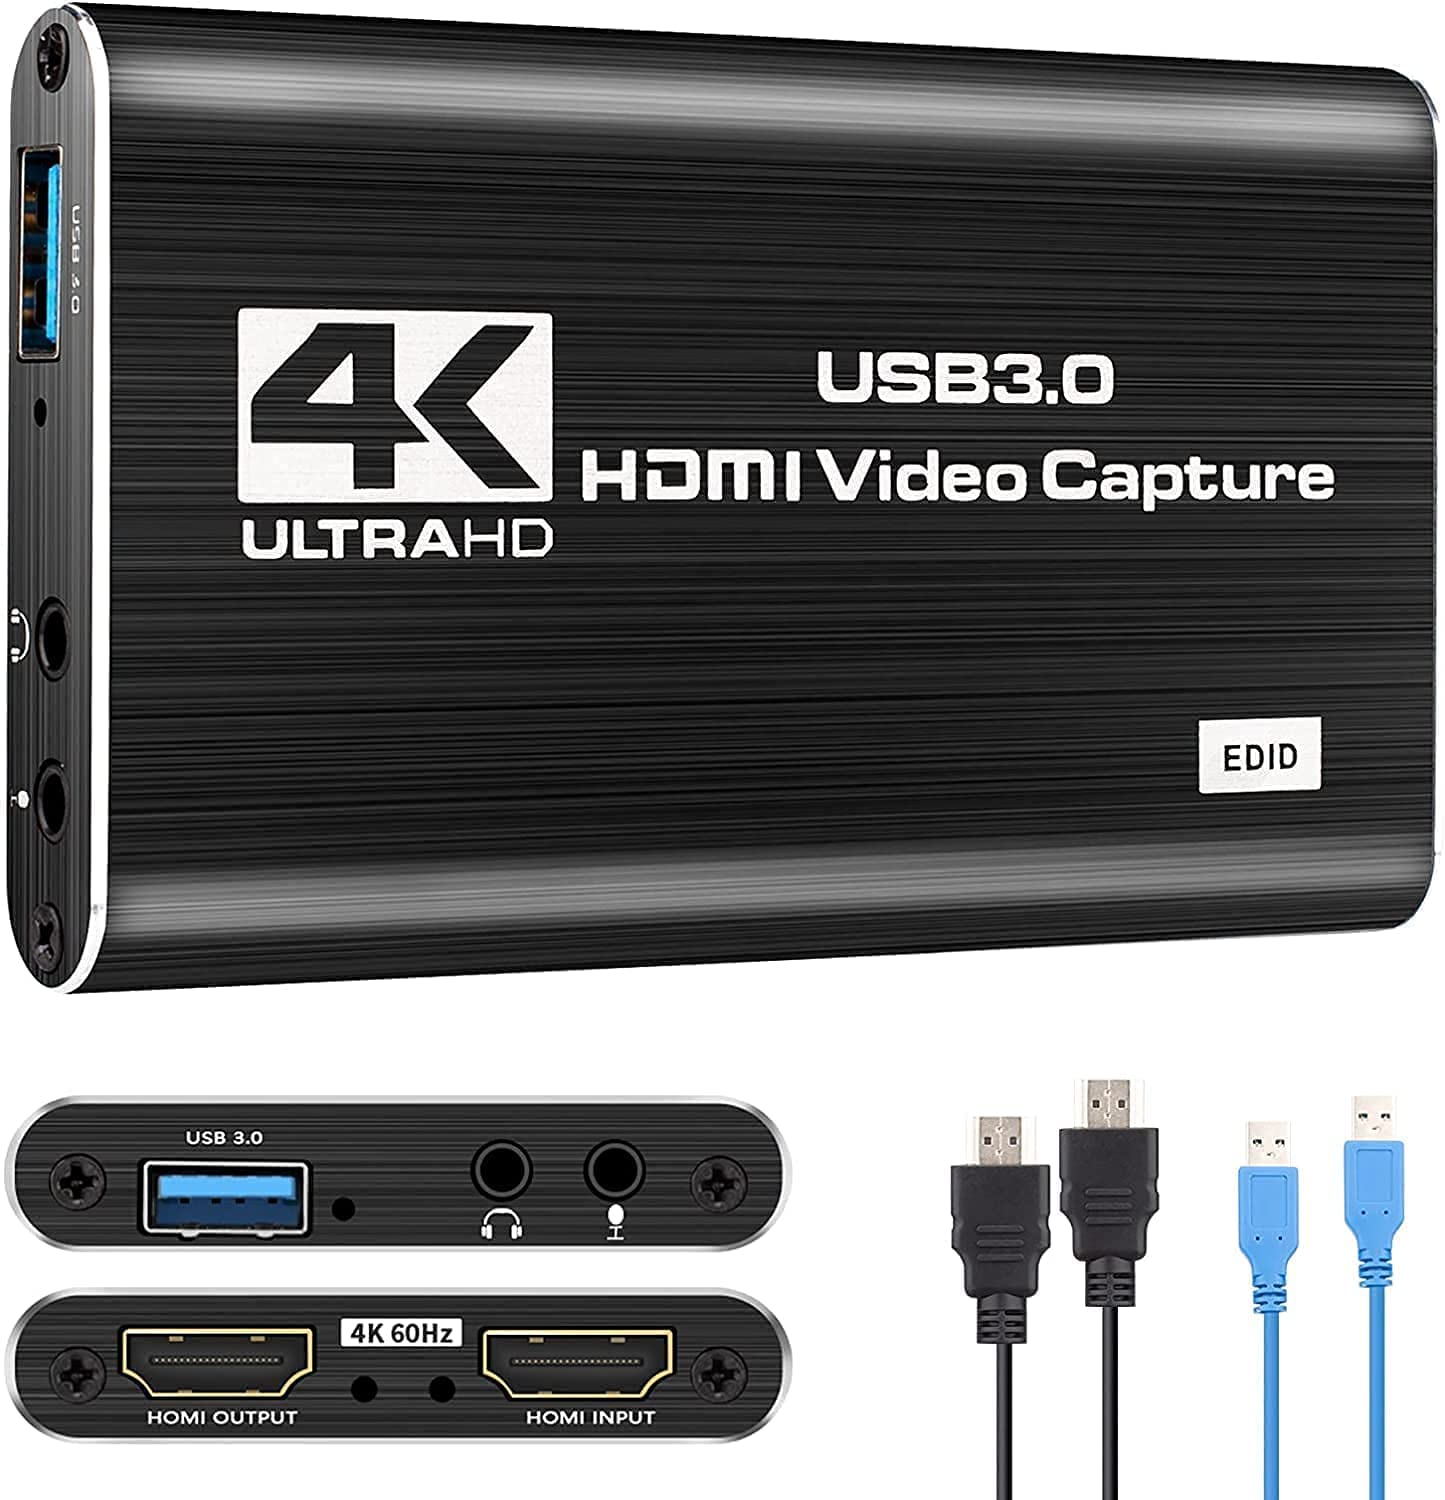 4K HDMI USB 3.0 Video Capture Adapter 1080P 60fps/Live streaming